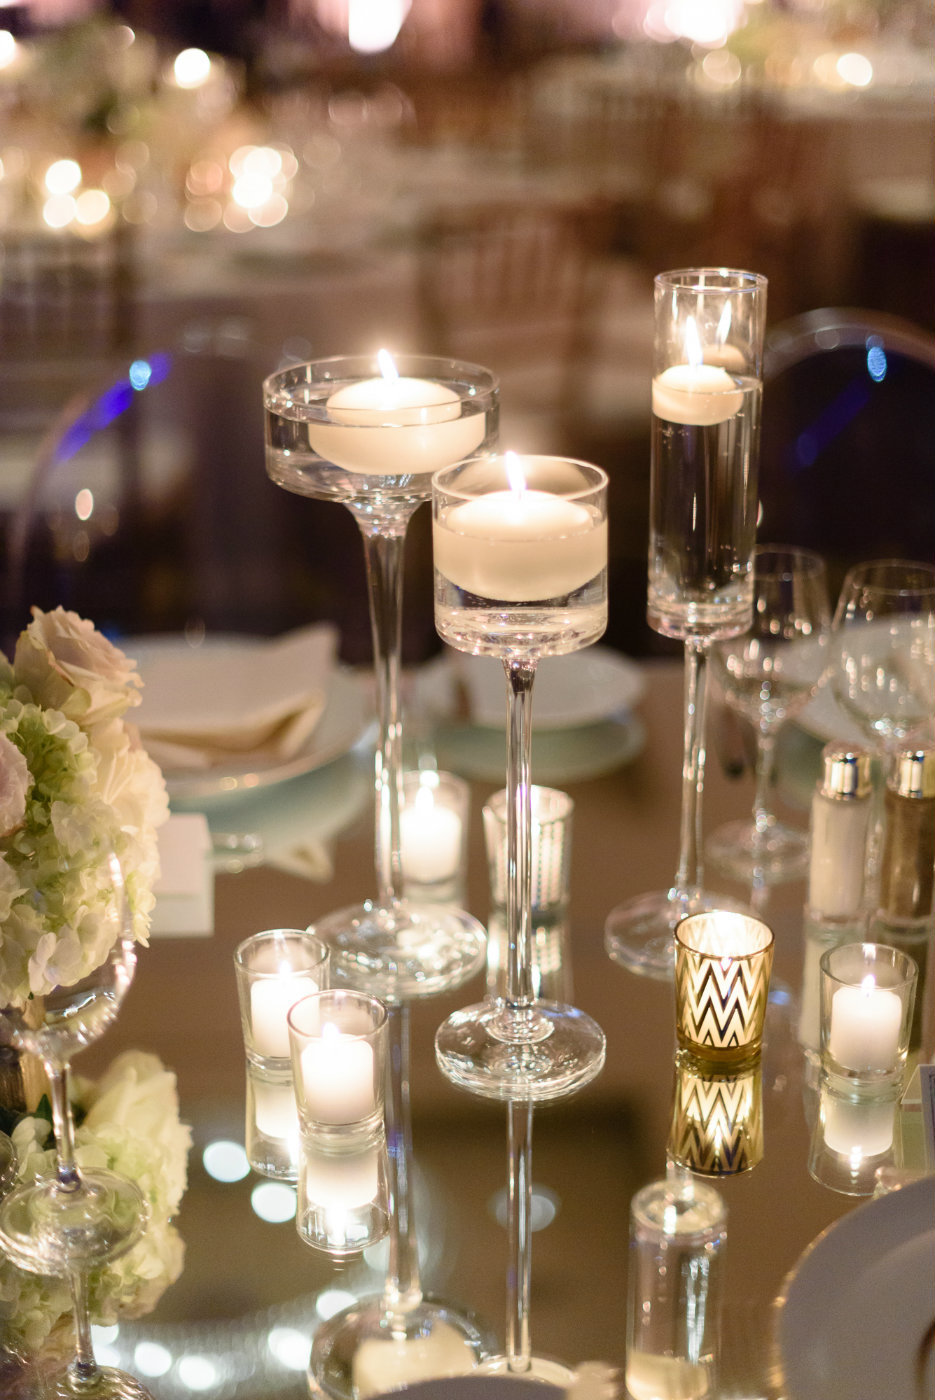 Mirrored table tops reflect the glow of candle light  around the room during this winter wedding.